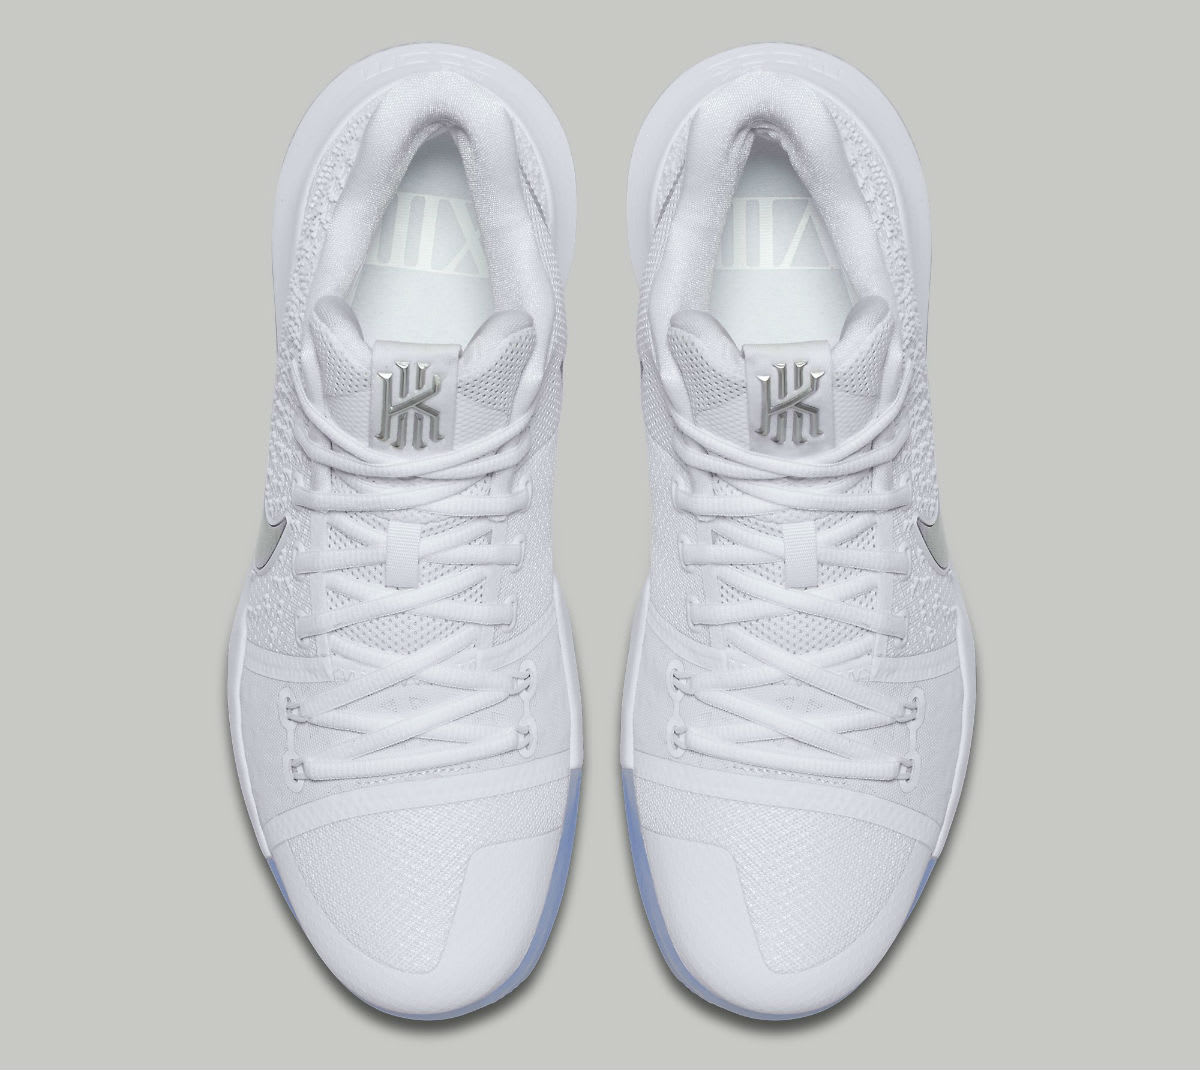 Nike Kyrie 3 Chrome Release Date Top 852395-103